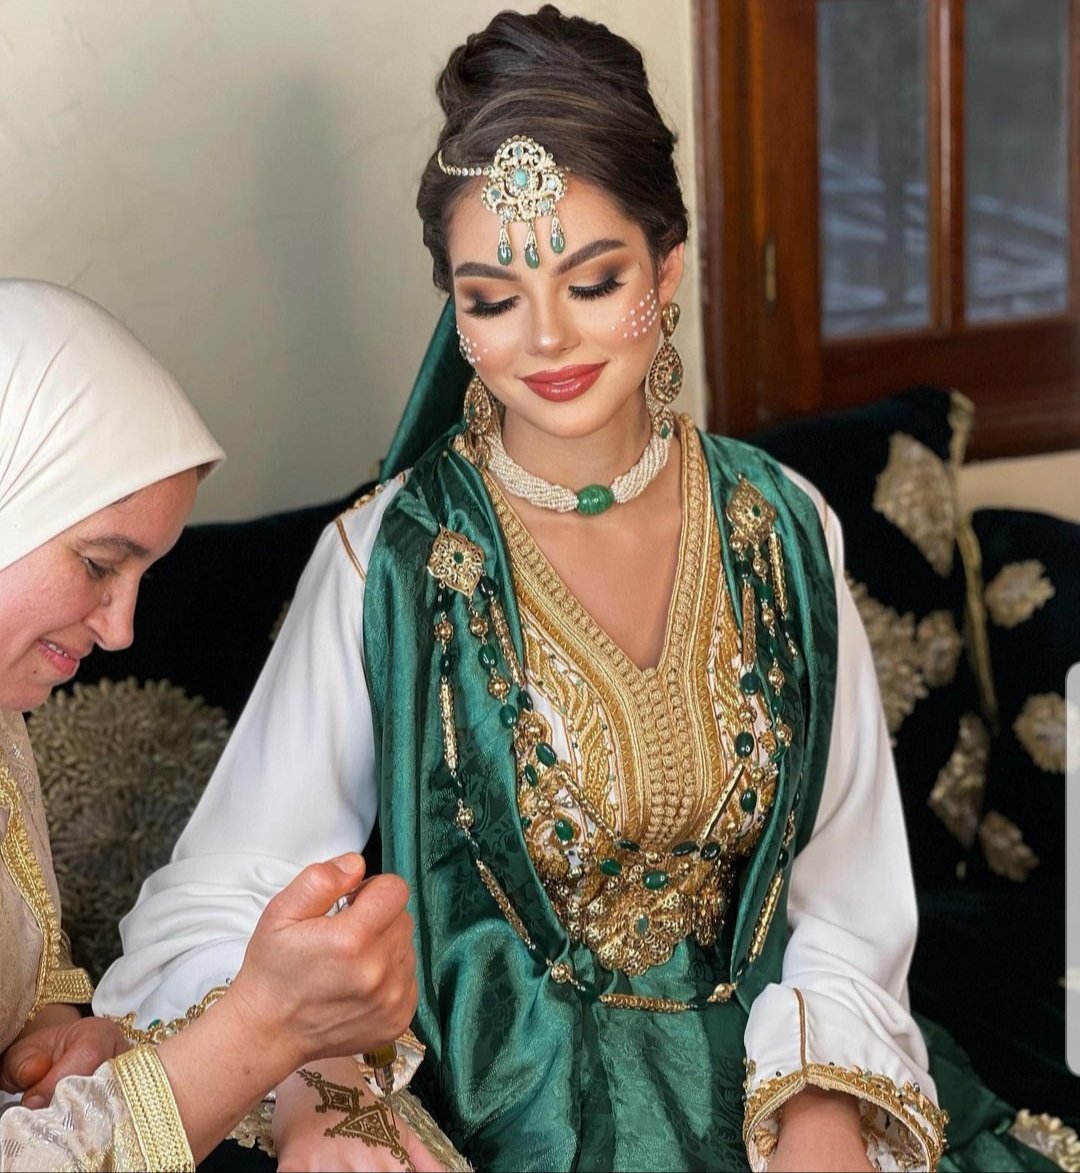 Bride to be on her ' Henna ' day.

She is dressed in a traditional Moroccan attire composed of an embroidered white silk Caftan and green 'takhlila' on top.

Credit photo: Negaffa Jawharat Al Afrah - Casablanca, Morocco